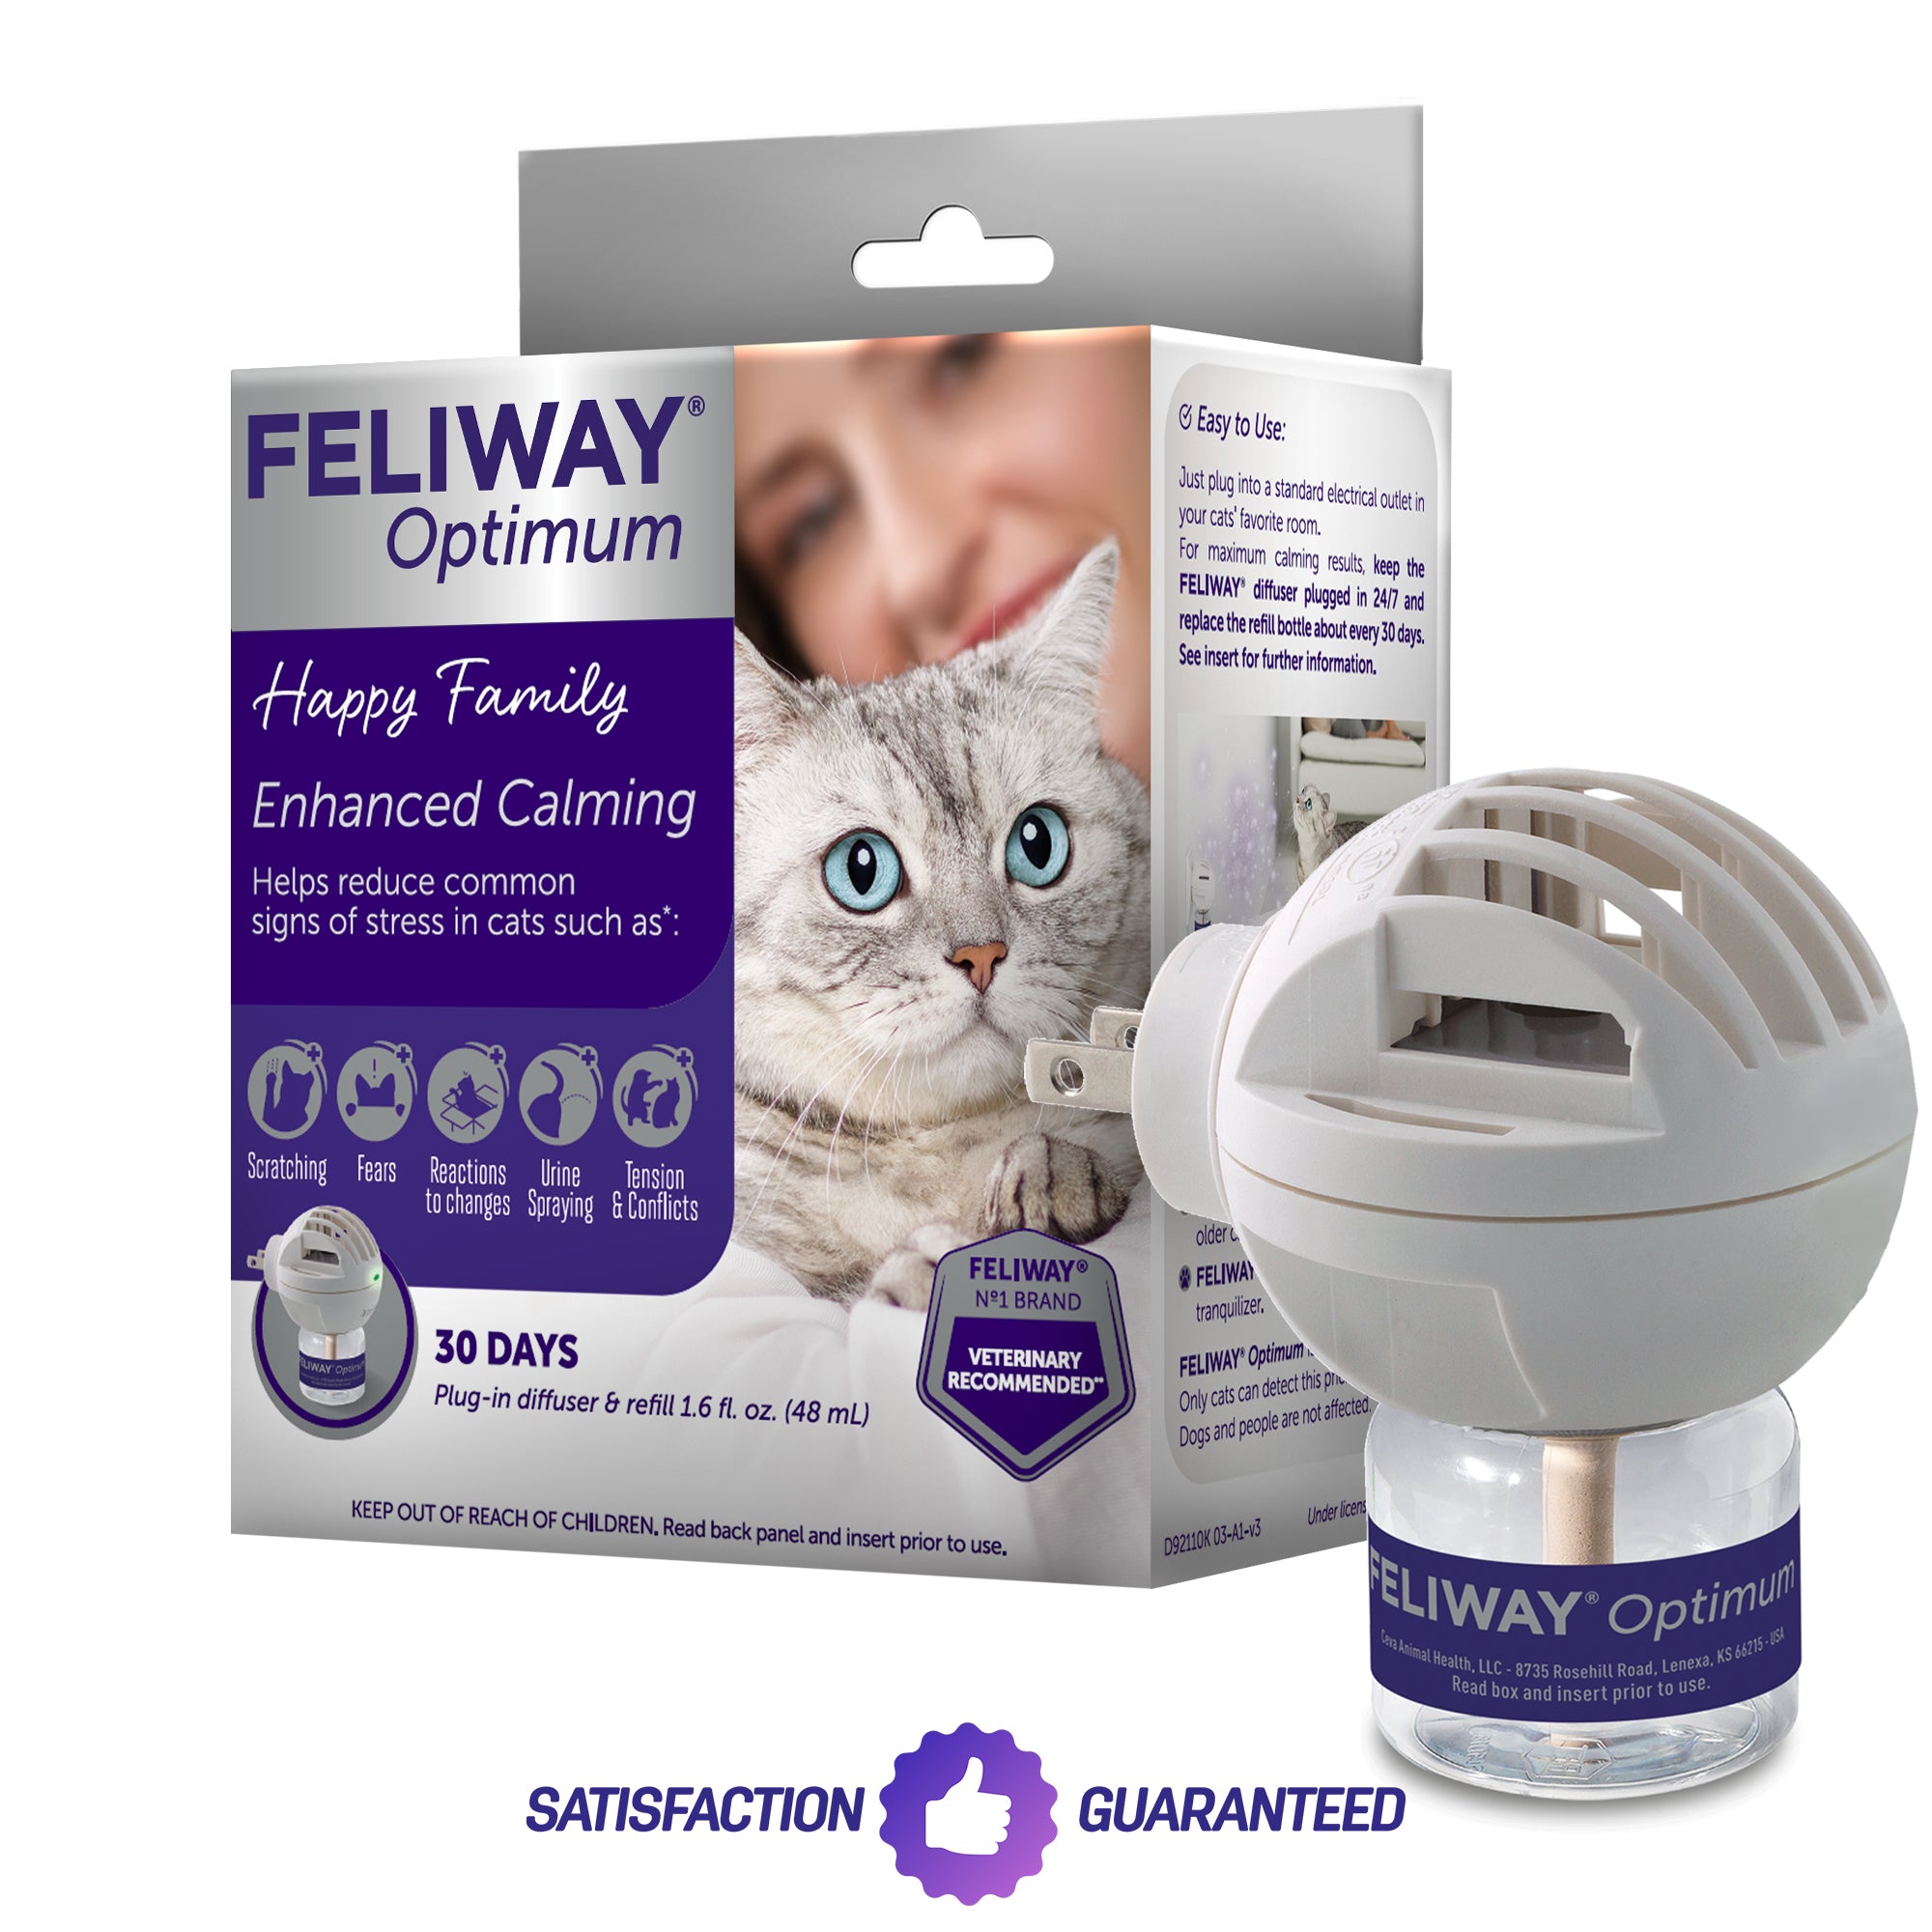 Feliway Classic diffuser for my cats